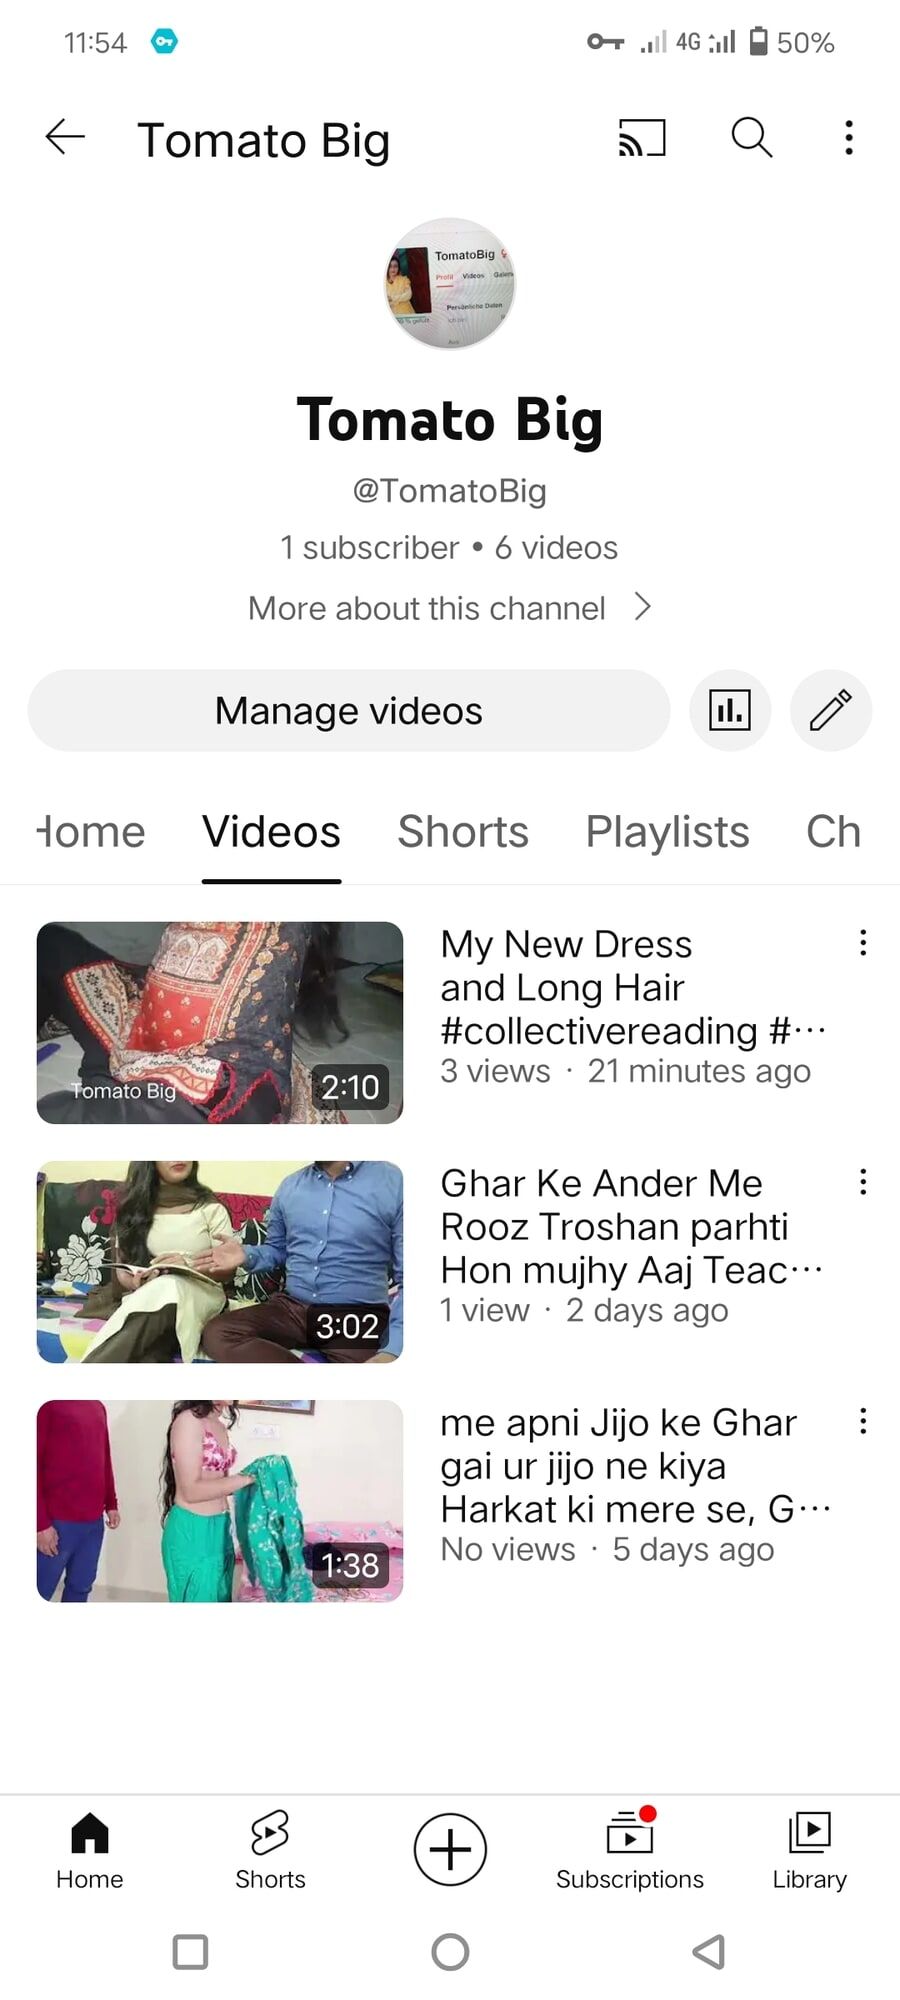 Join kro YouTube Channel ko and Subscribe